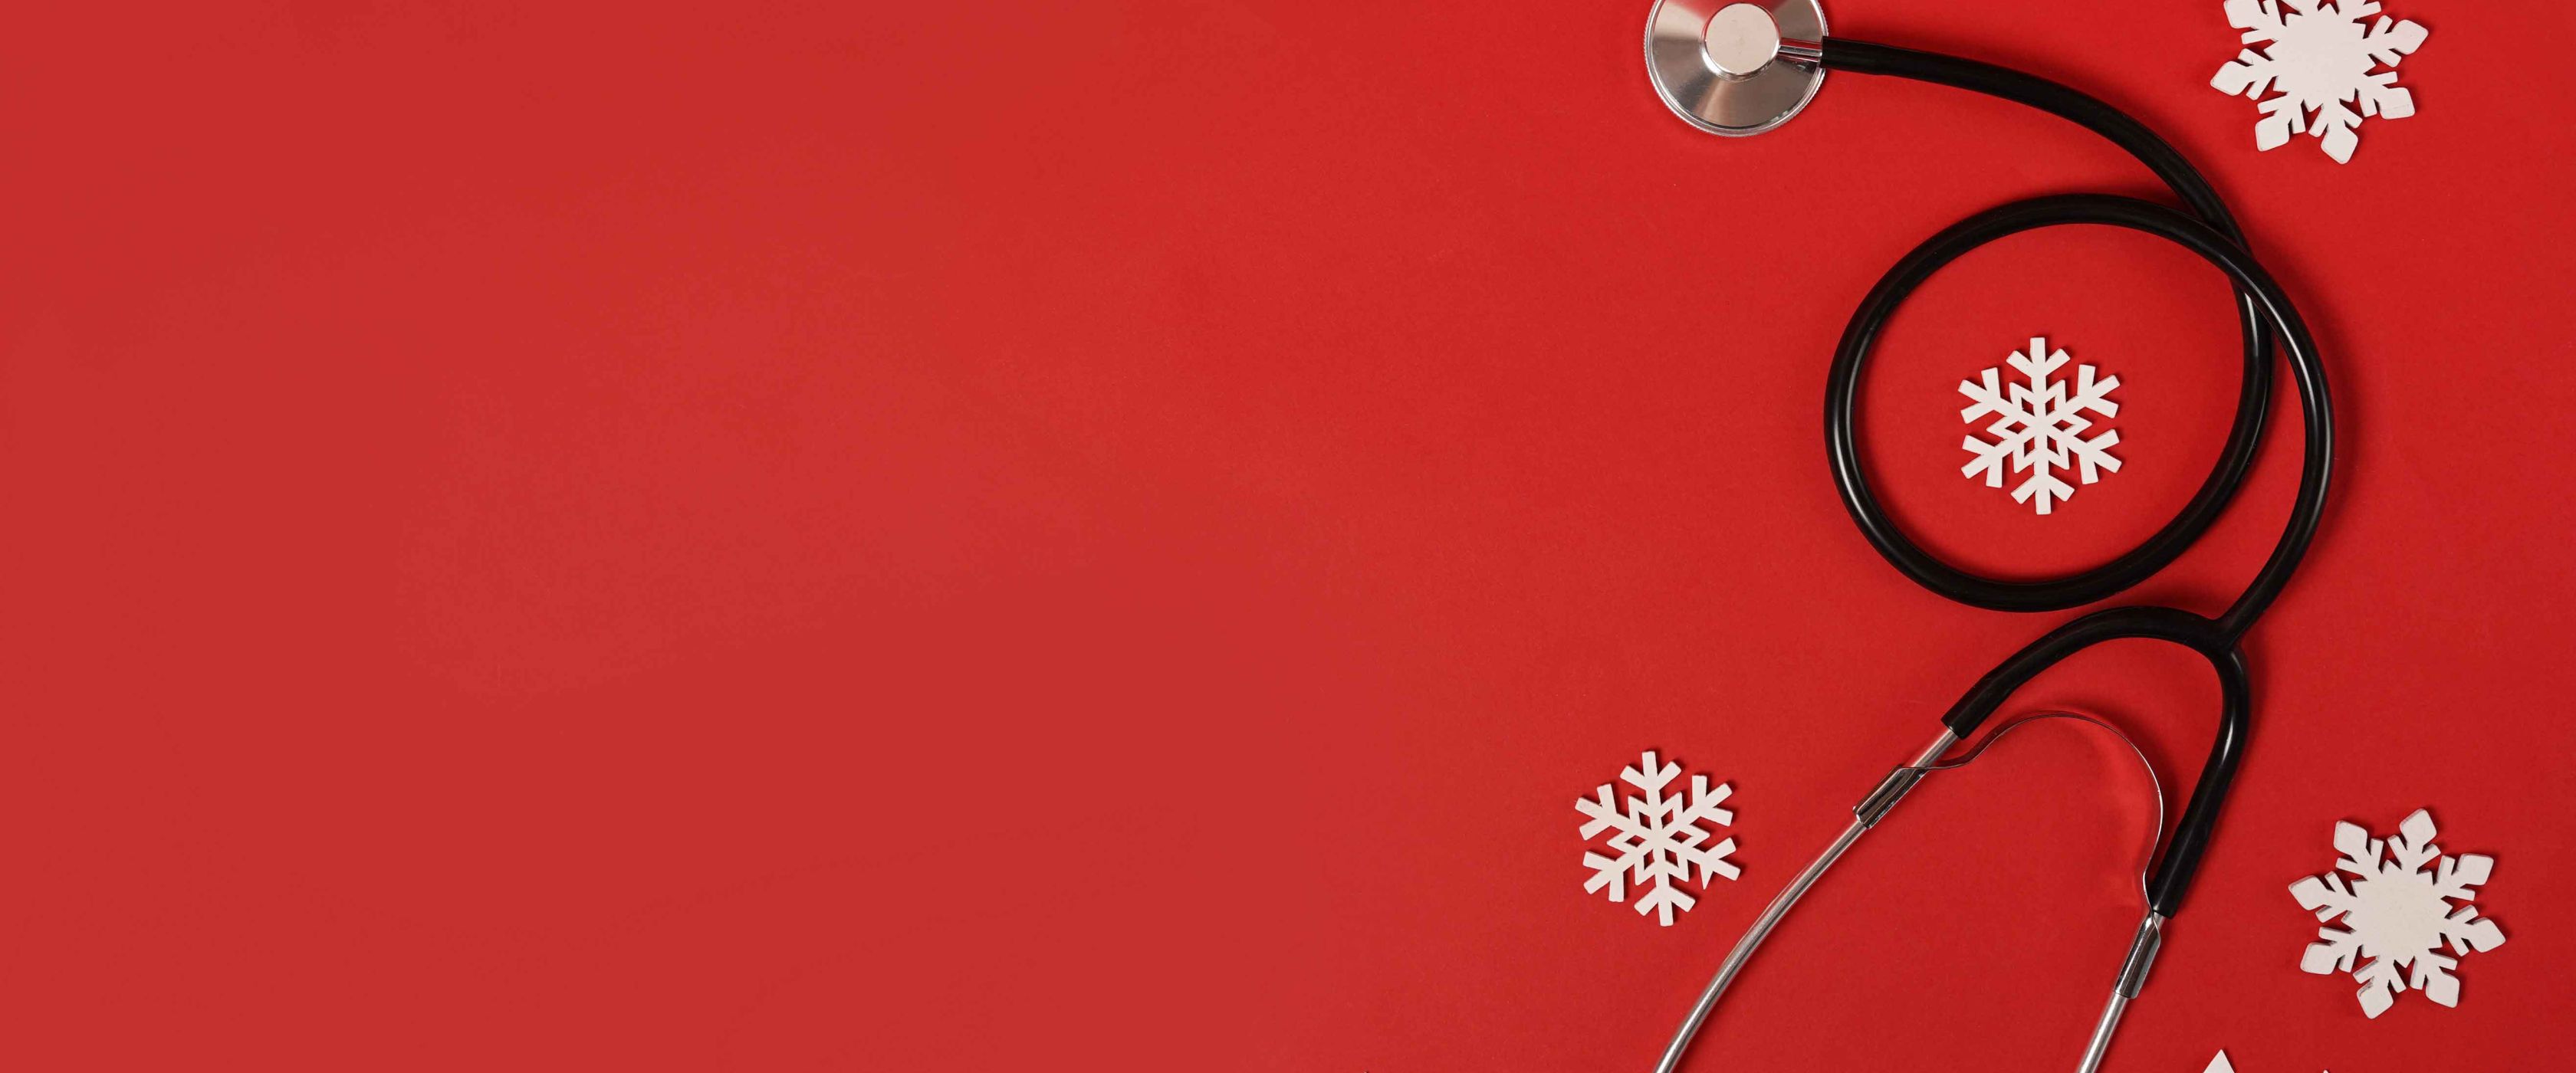 Stethoscope on red background with snowflakes